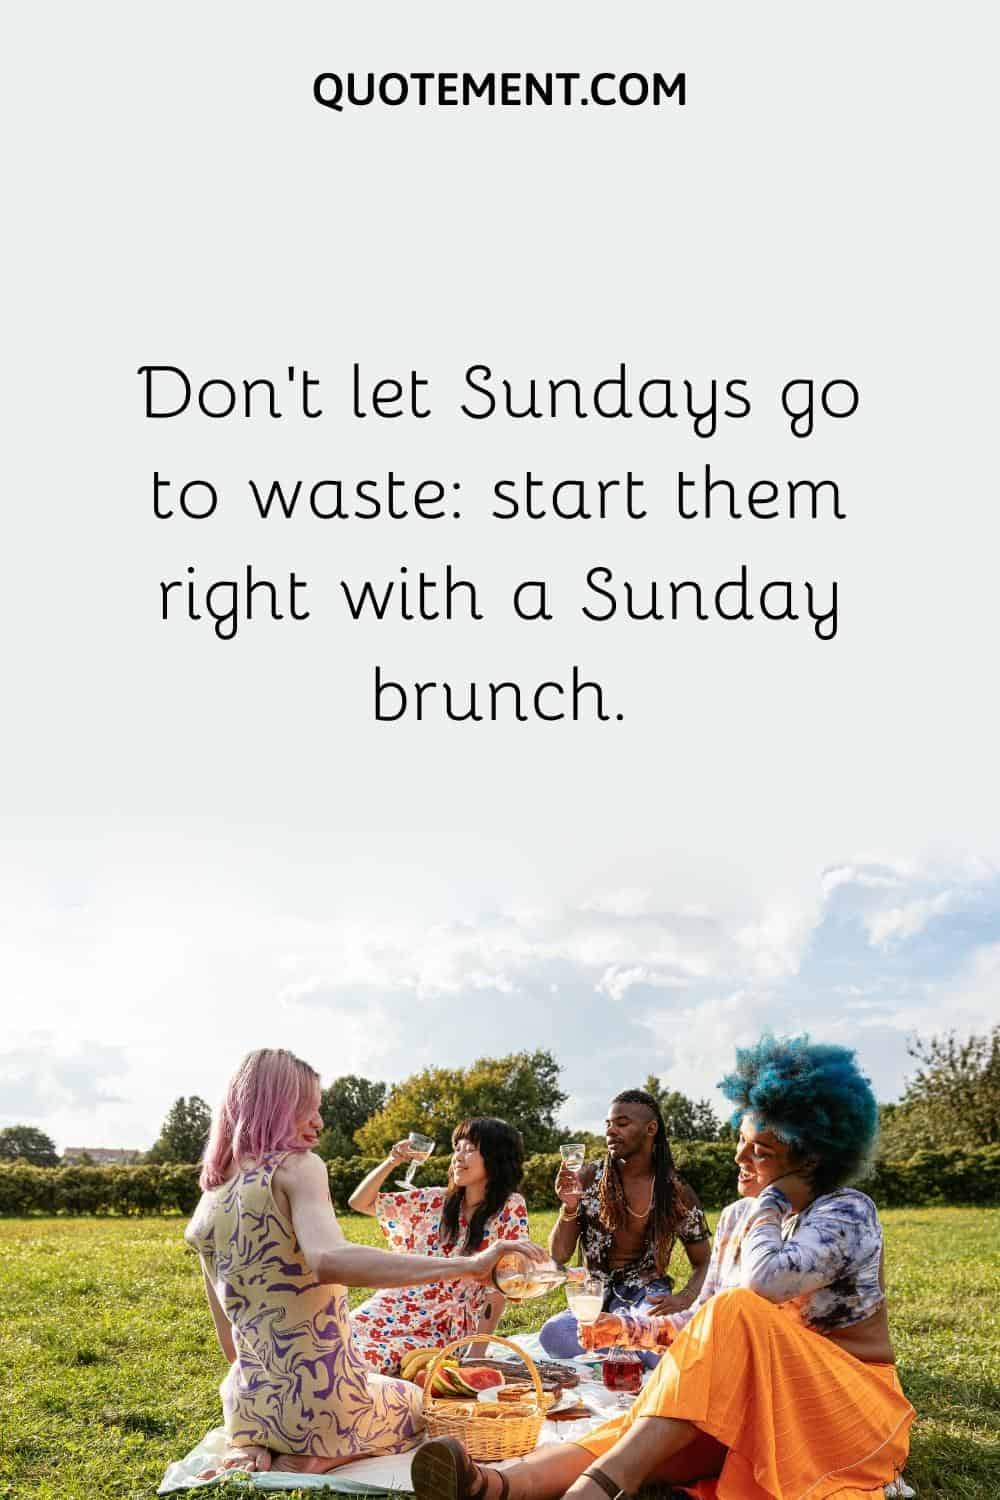 Don't let Sundays go to waste start them right with a Sunday brunch.